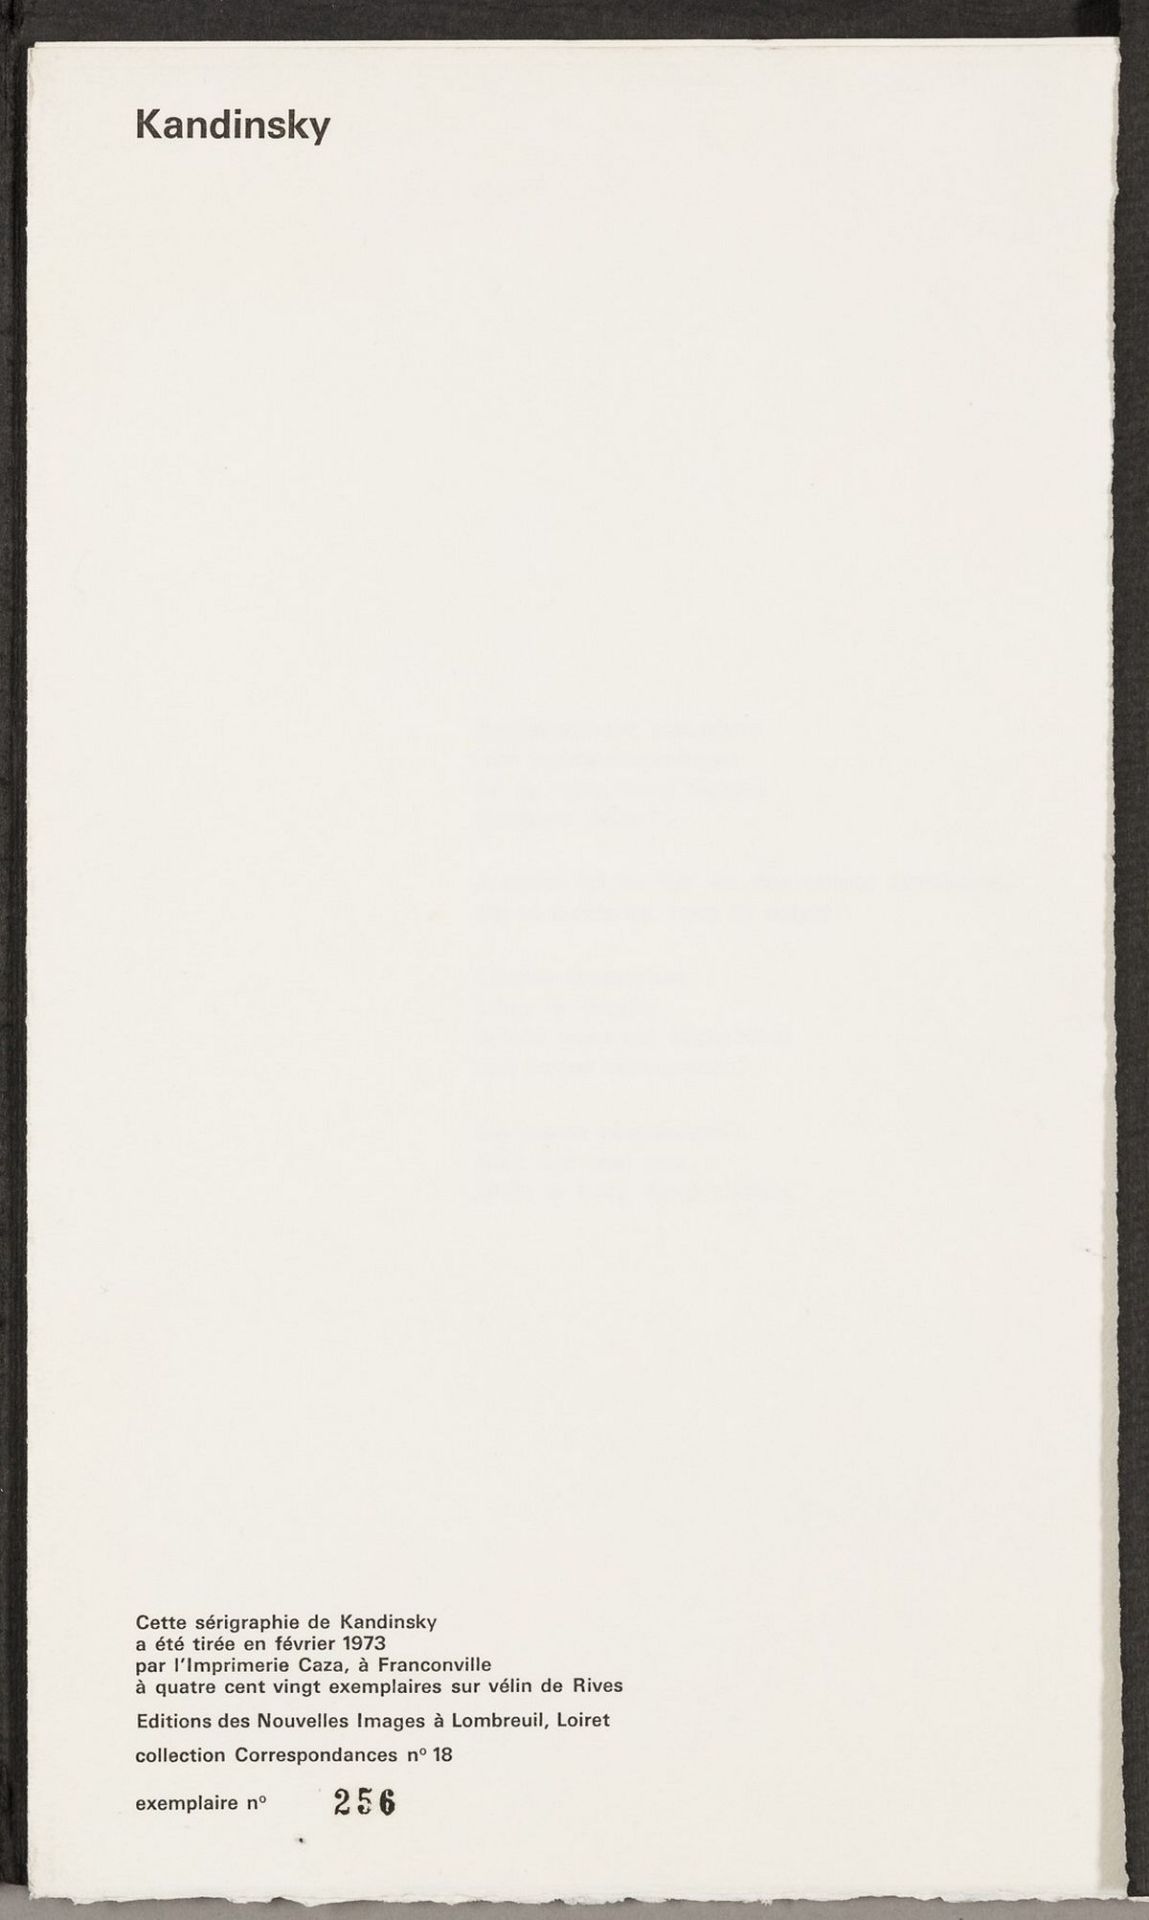 Kandinsky, Wassily(1866 - 1944)Composition, II. 1973serigraphynumbered: Nr. 256closed: 12,8 x 9,8 - Image 3 of 7